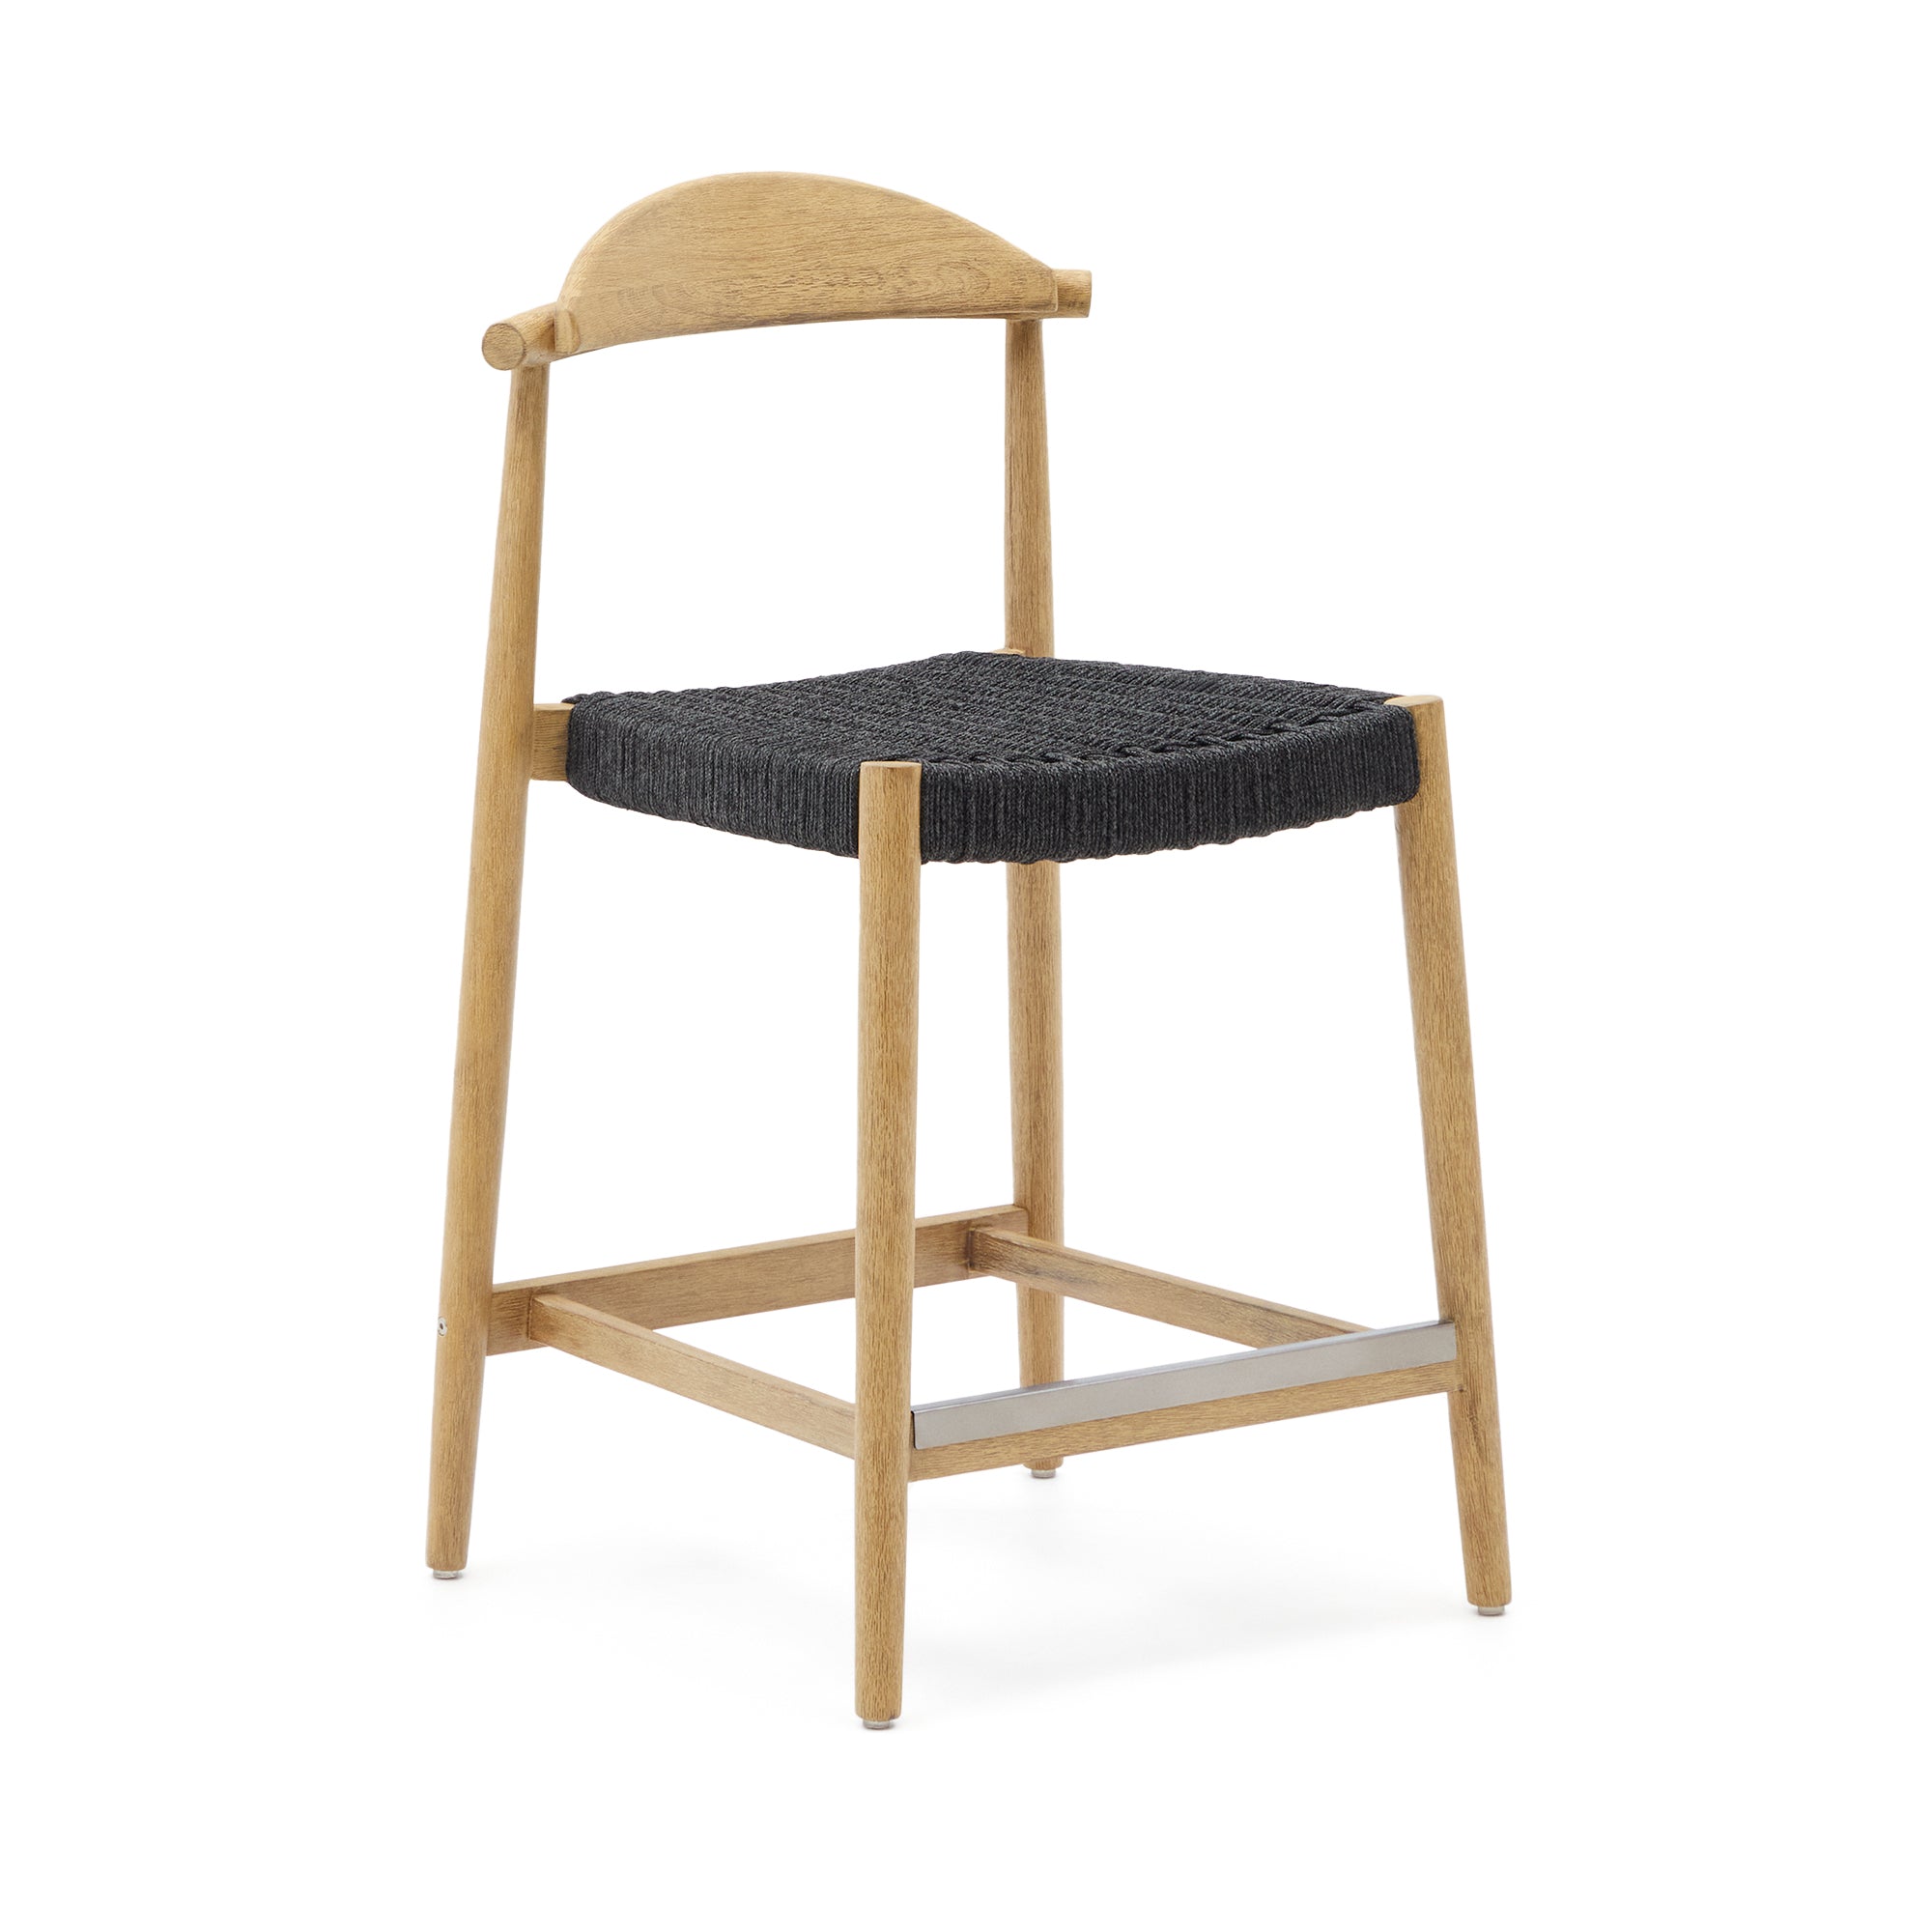 Nina chair, made of solid acacia wood, natural finish and black rope, height 62 cm